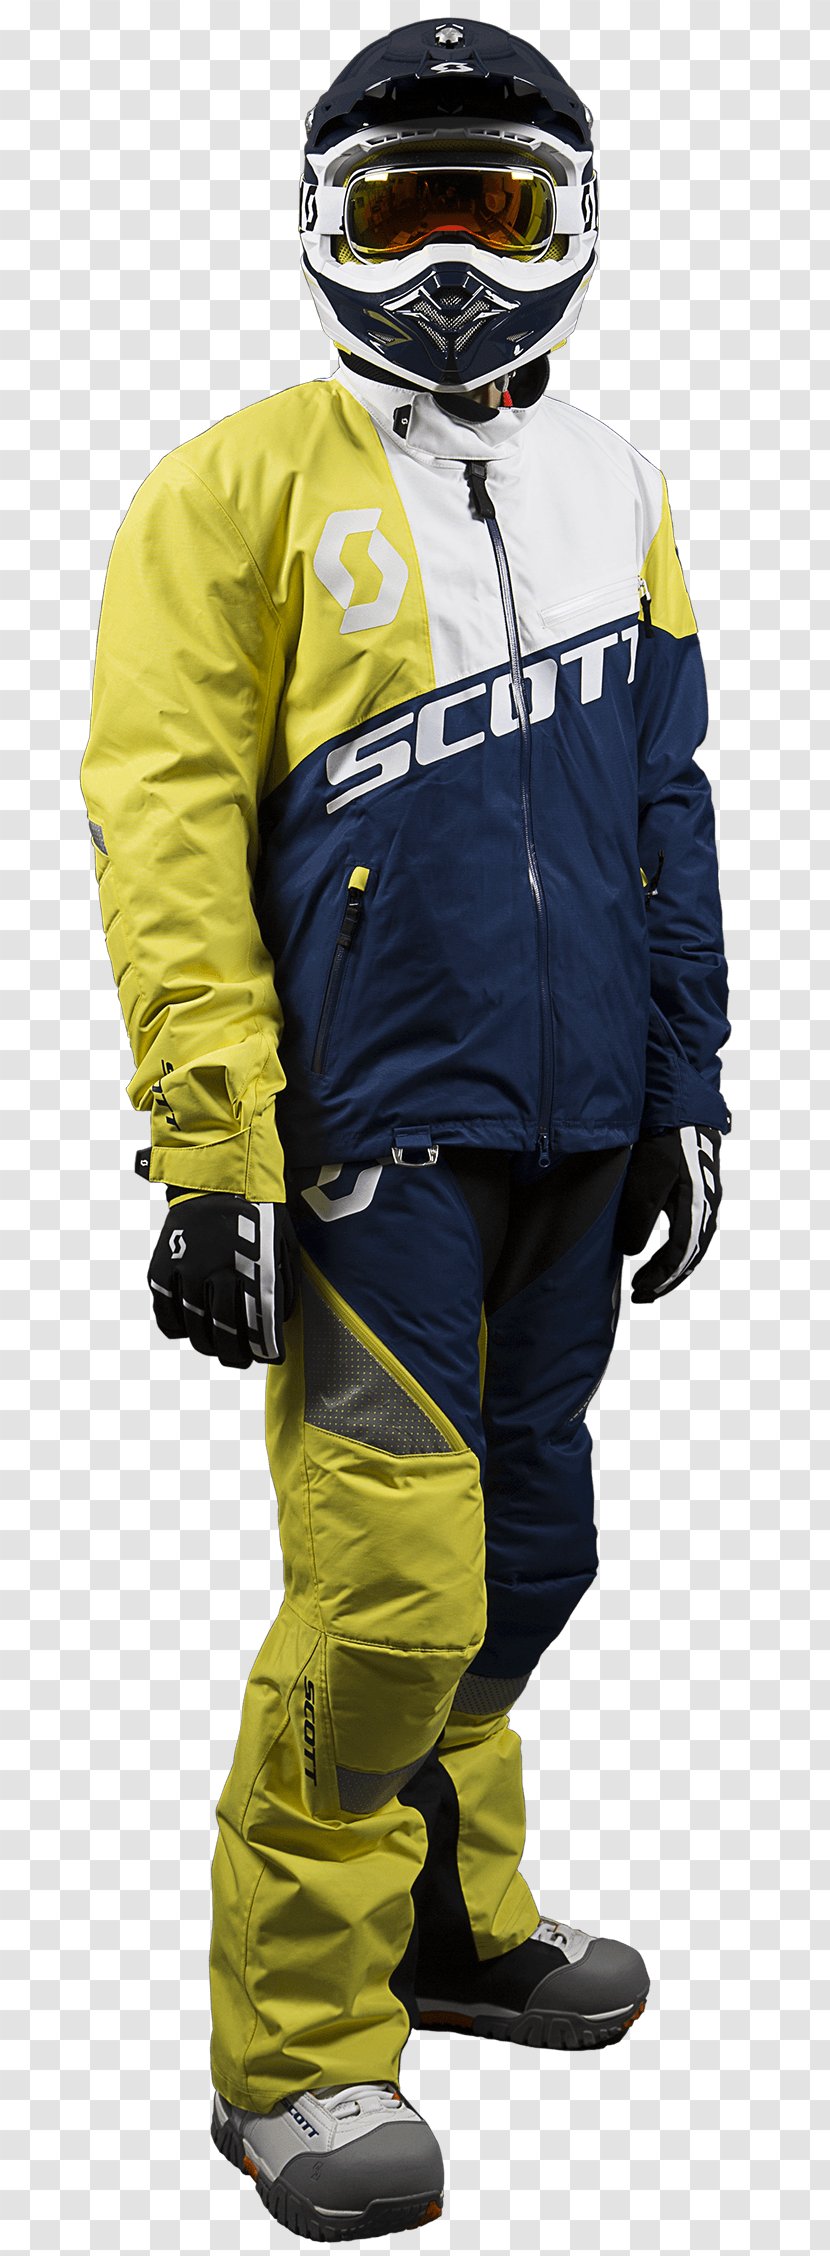 Hockey Protective Pants & Ski Shorts Outerwear Jacket Hazardous Material Suits Helmet - Gear In Sports Transparent PNG